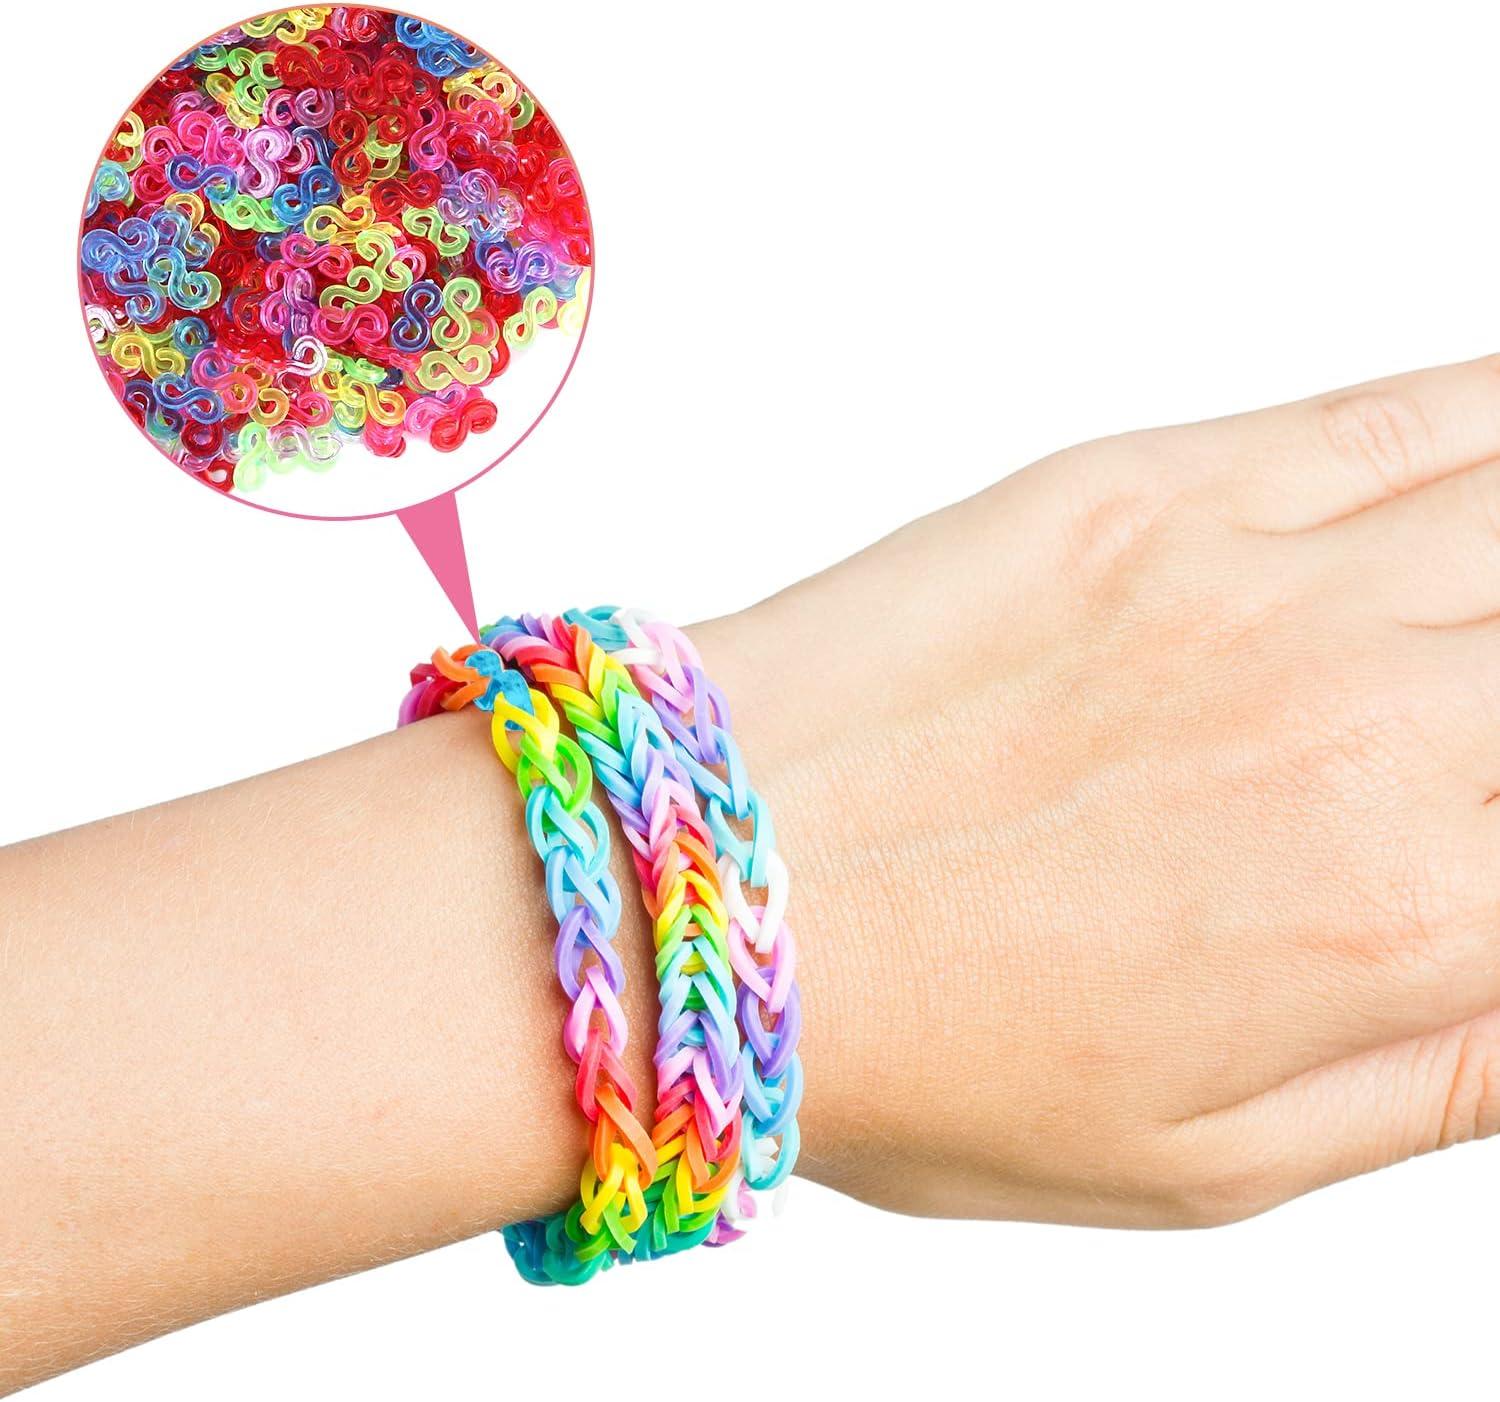 How to Make a Simple Loom Band Bracelet (Without a Loom!) - FeltMagnet